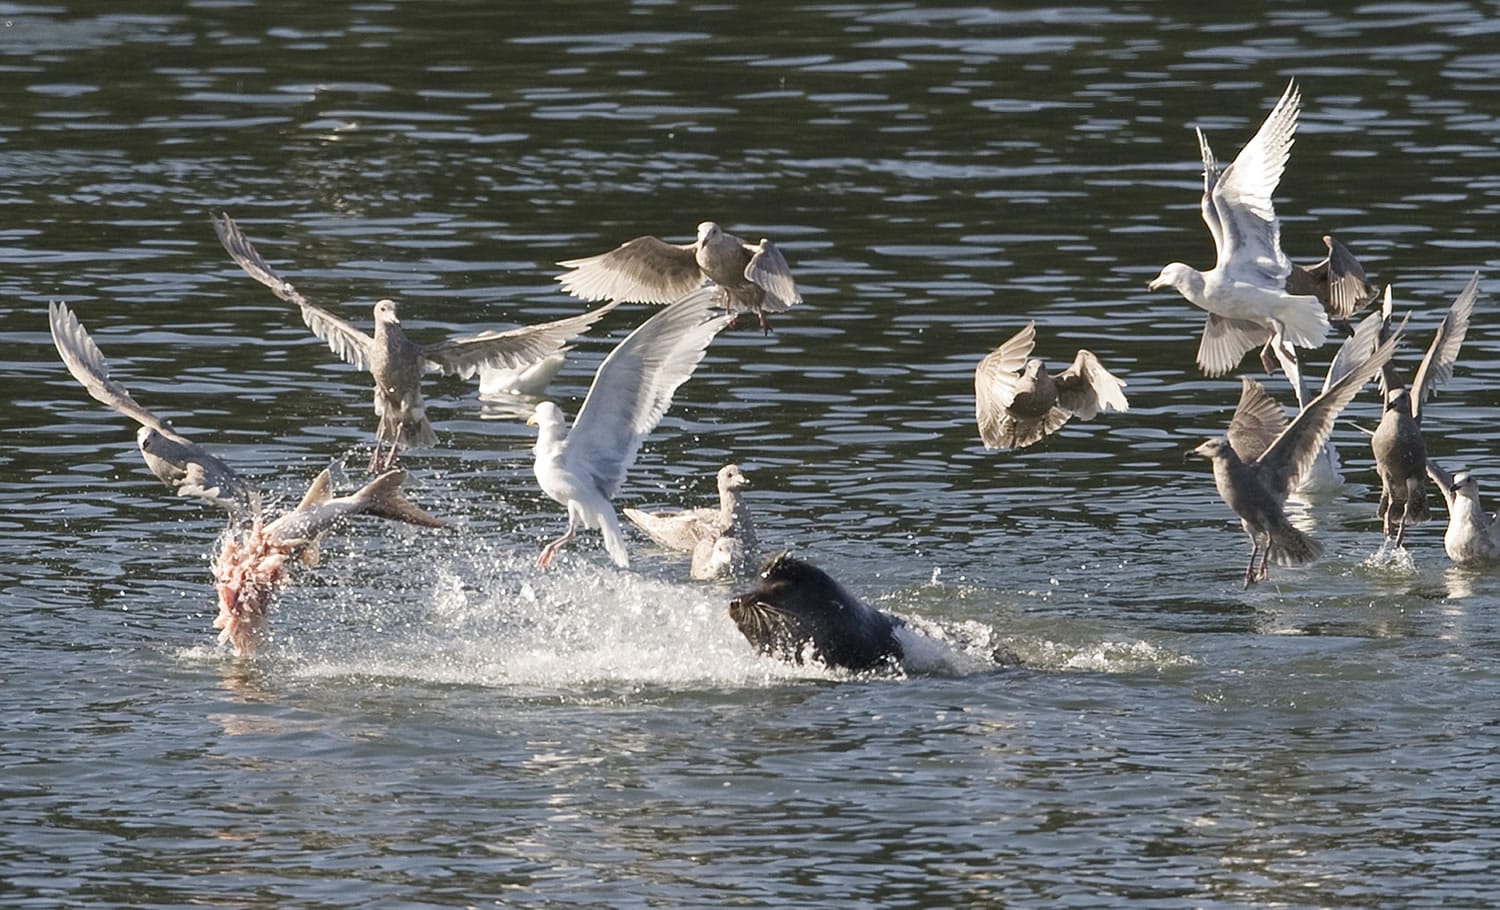 Sea lions feed on sturgeon from the mouth of the Columbia River upstream to Bonneville Dam.